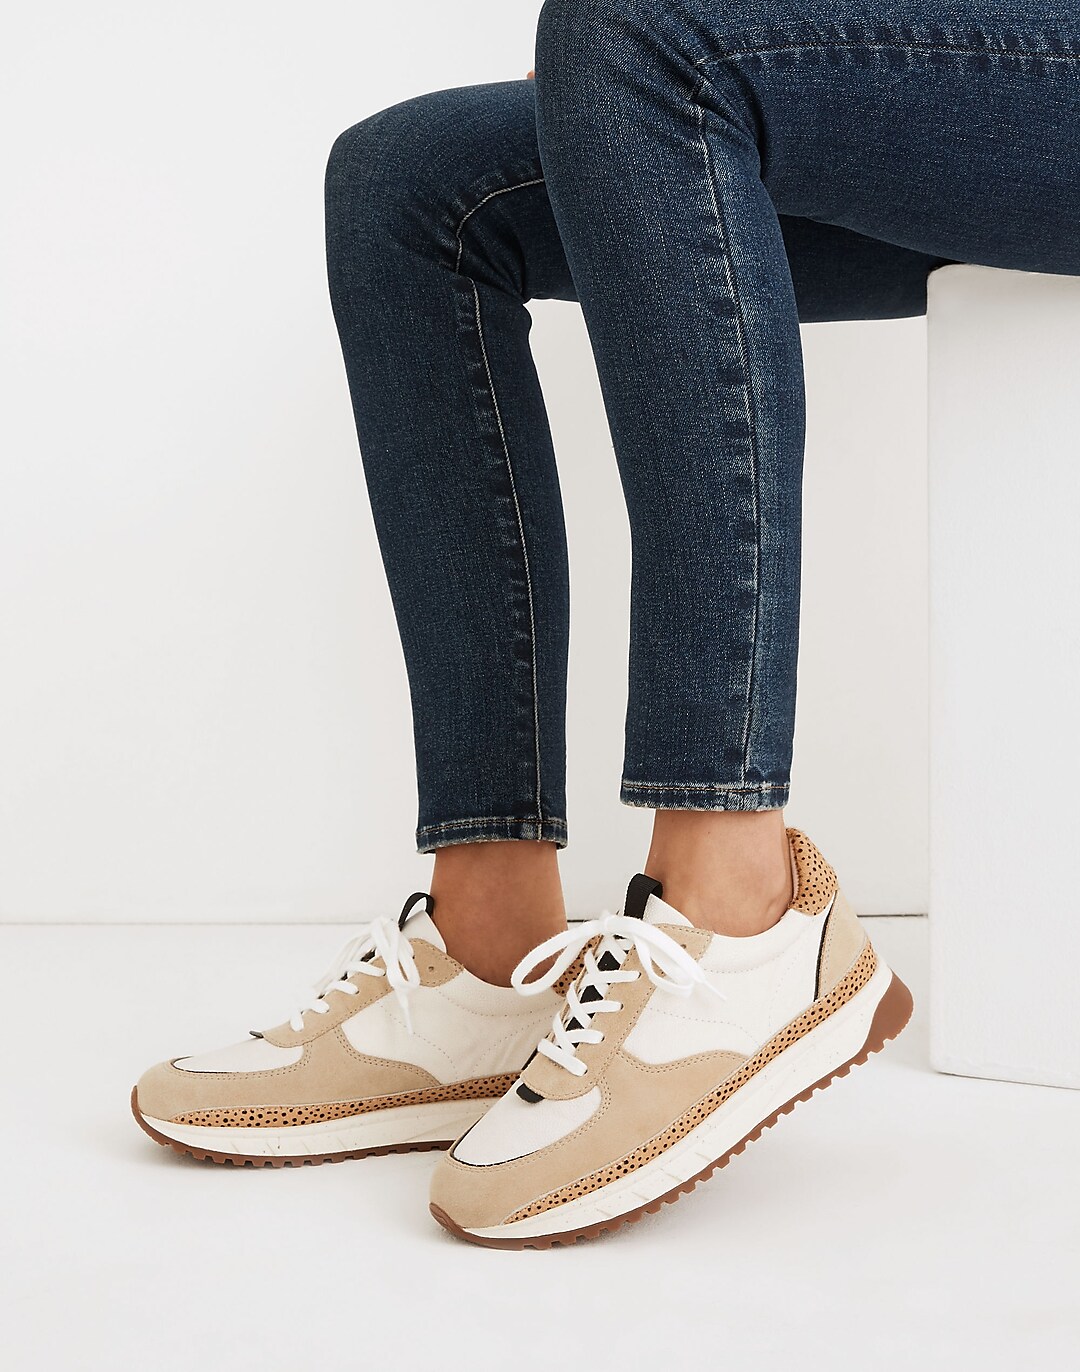 Kickoff Trainer Sneakers in Leather and Spot Dot Calf Hair